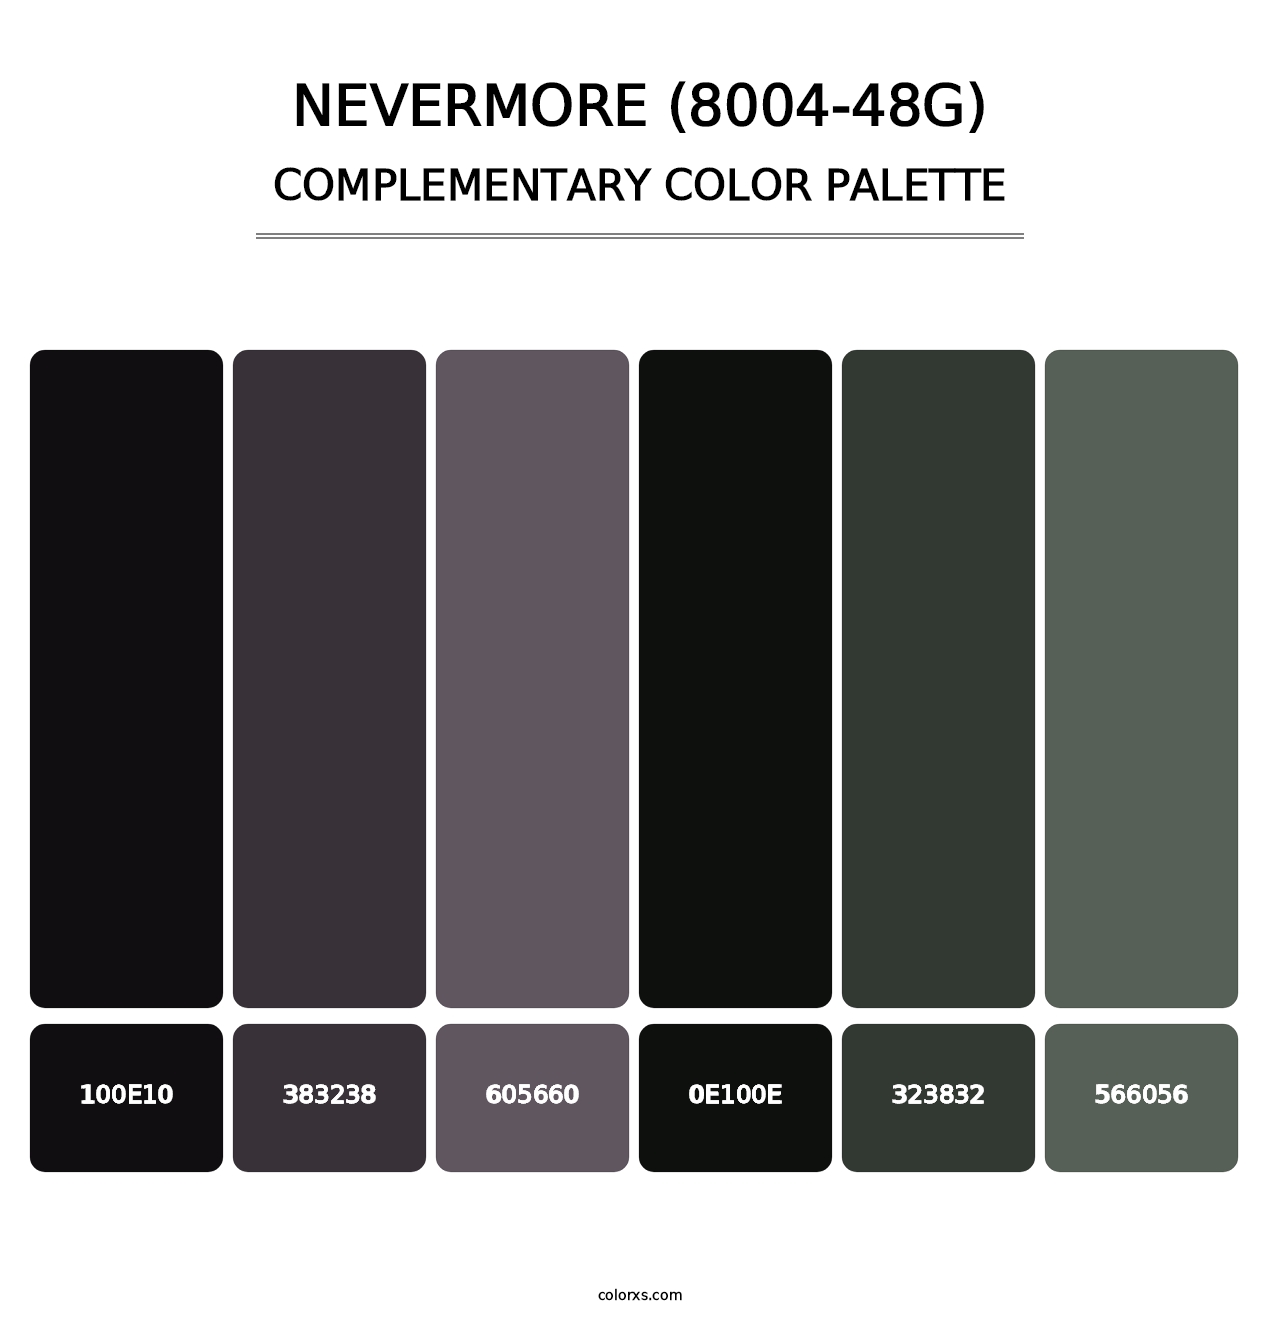 Nevermore (8004-48G) - Complementary Color Palette